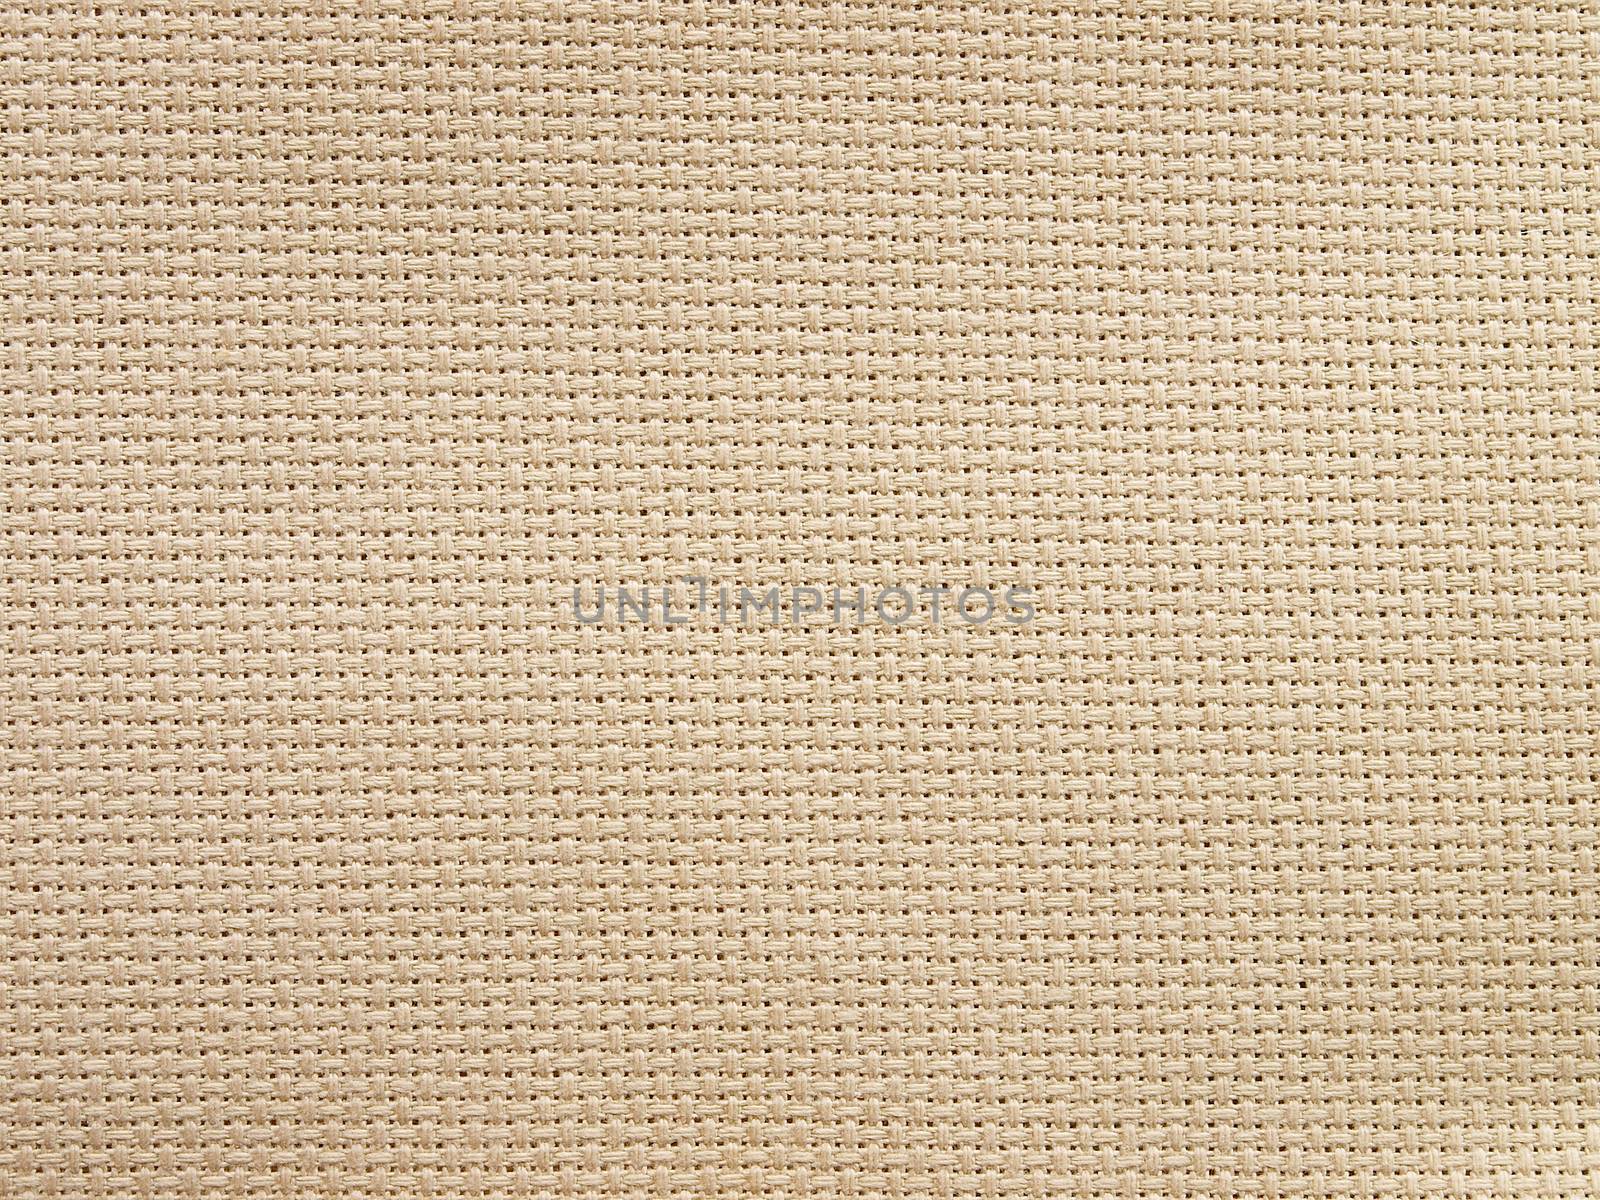 High resolution image of linen background material. Middle scale.